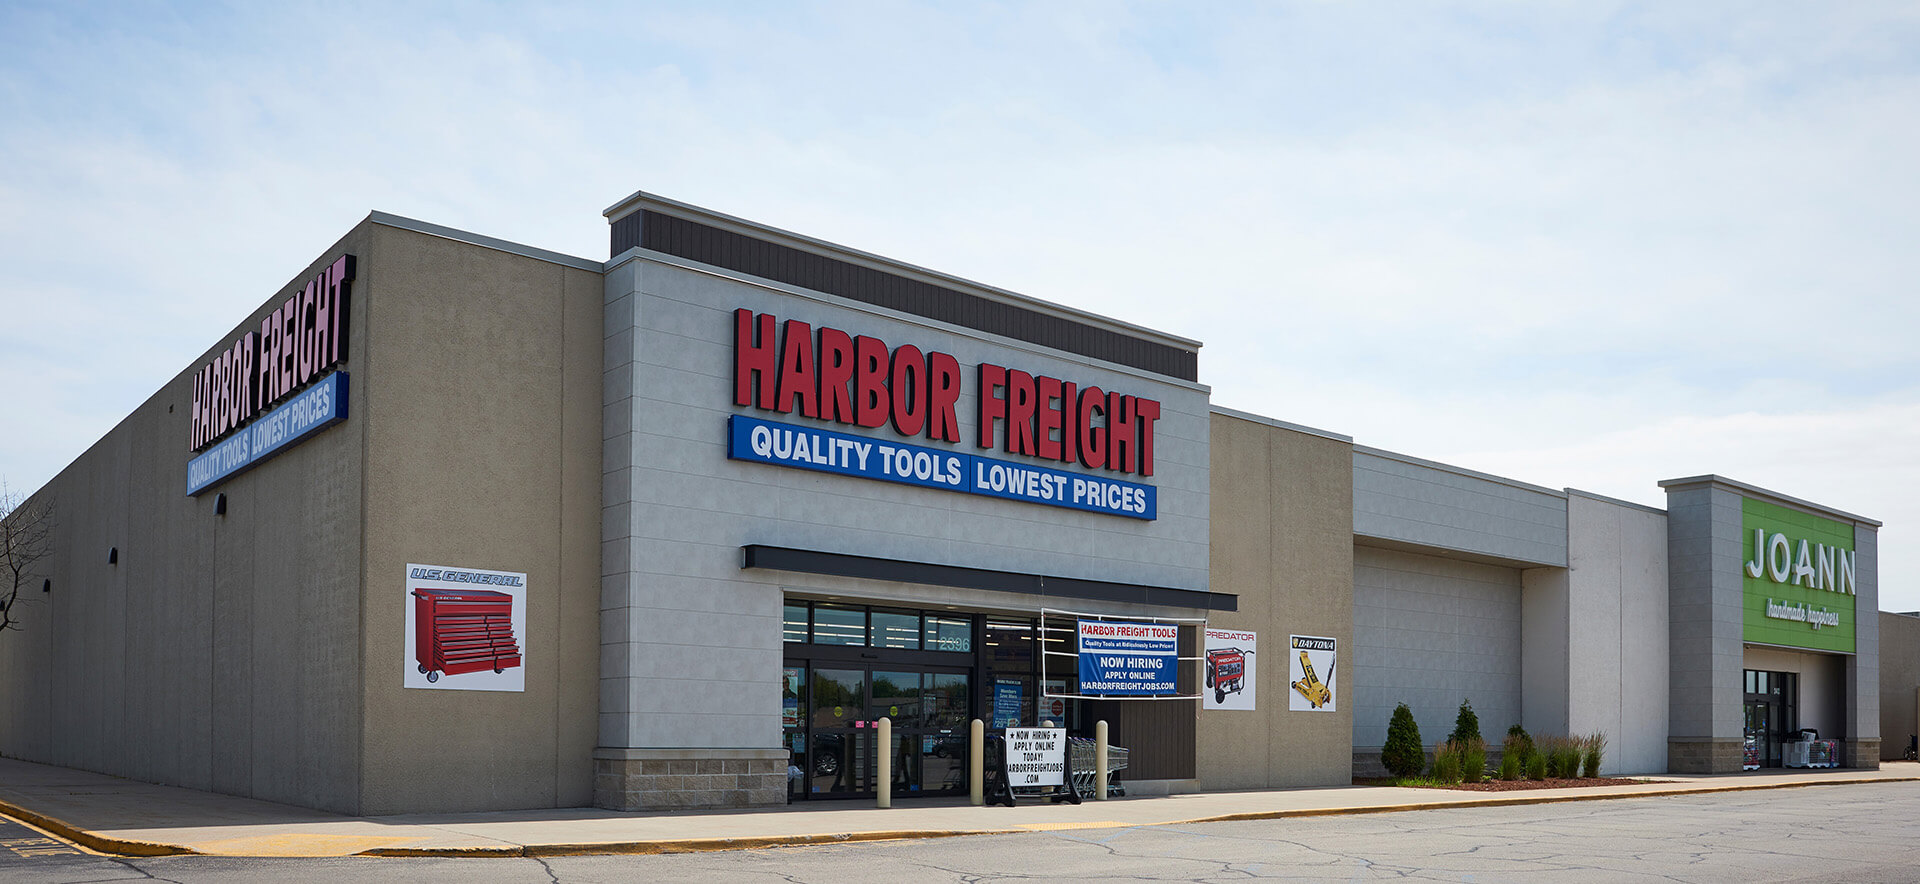 Harbor Freight and Joann Fabrics in Marinette, WI